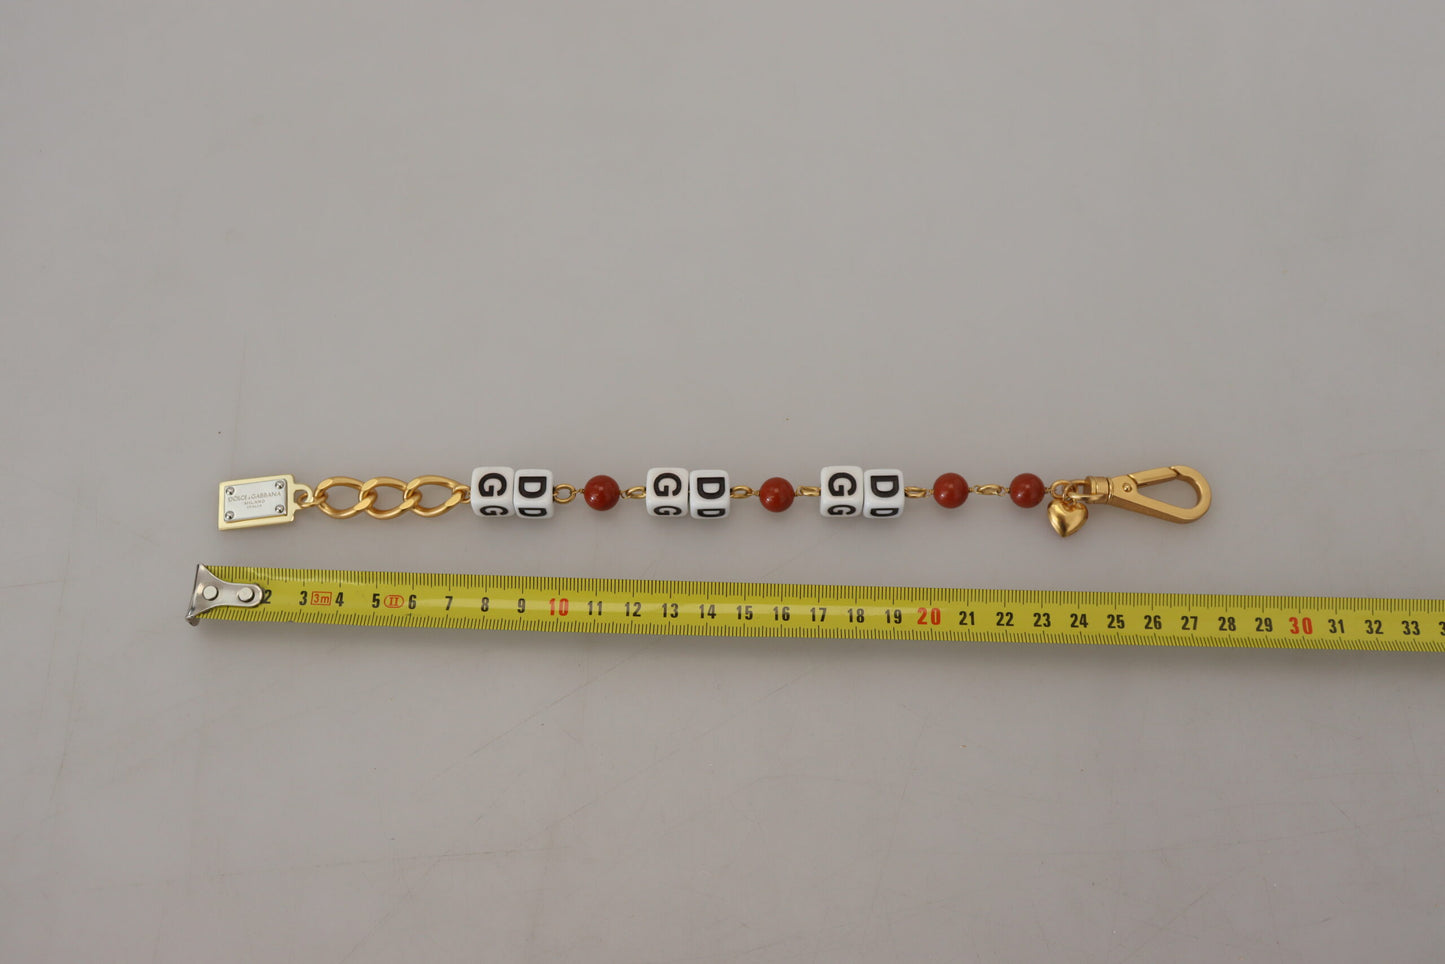 Elegant Beaded Chain Bracelet with Multicolor Accents